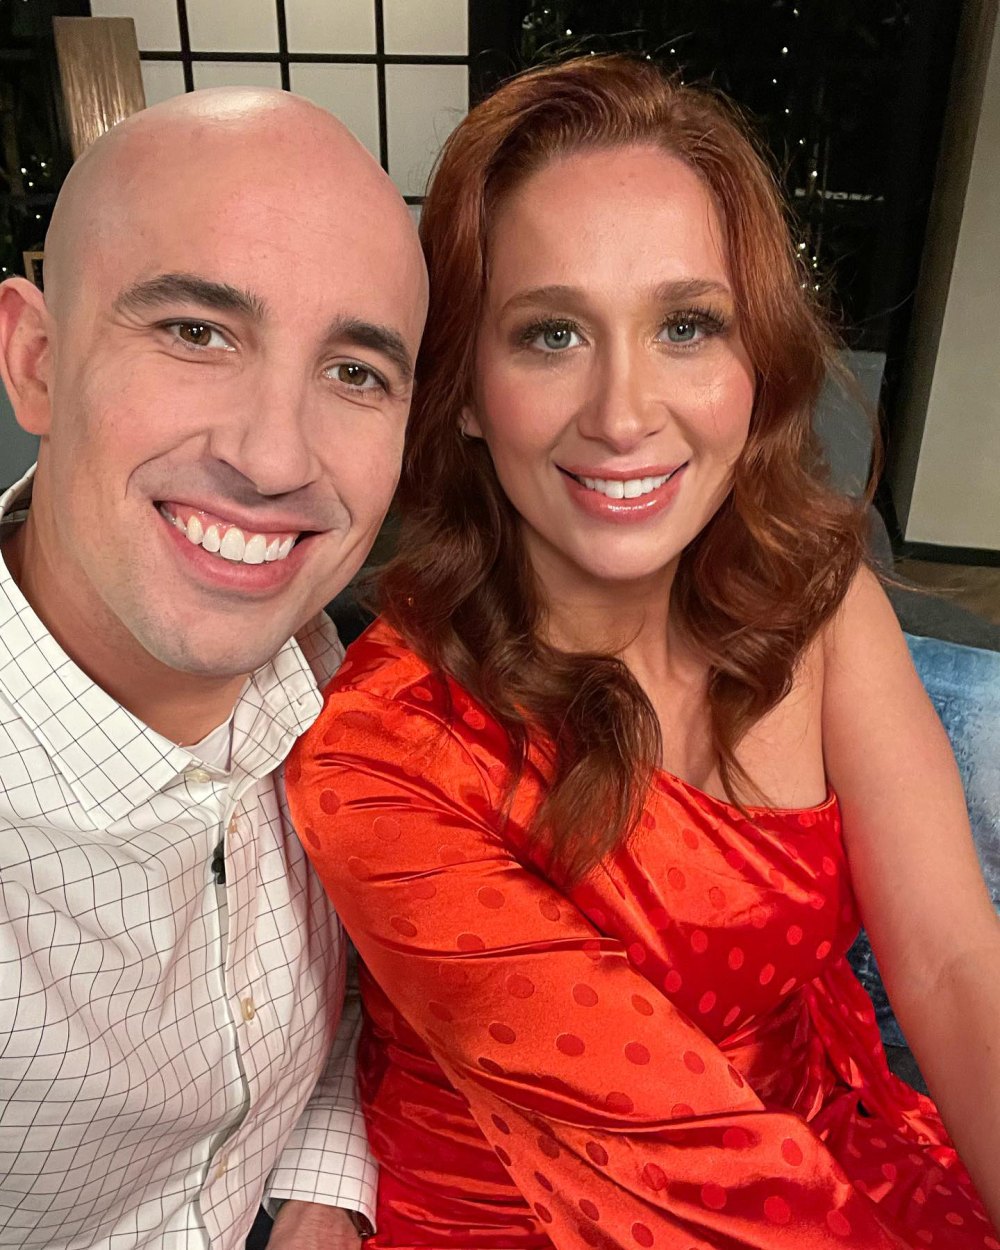 Married at First Sight’s Jamie Thompson and Elizabeth Bice Split, File for Divorce After 4 Years